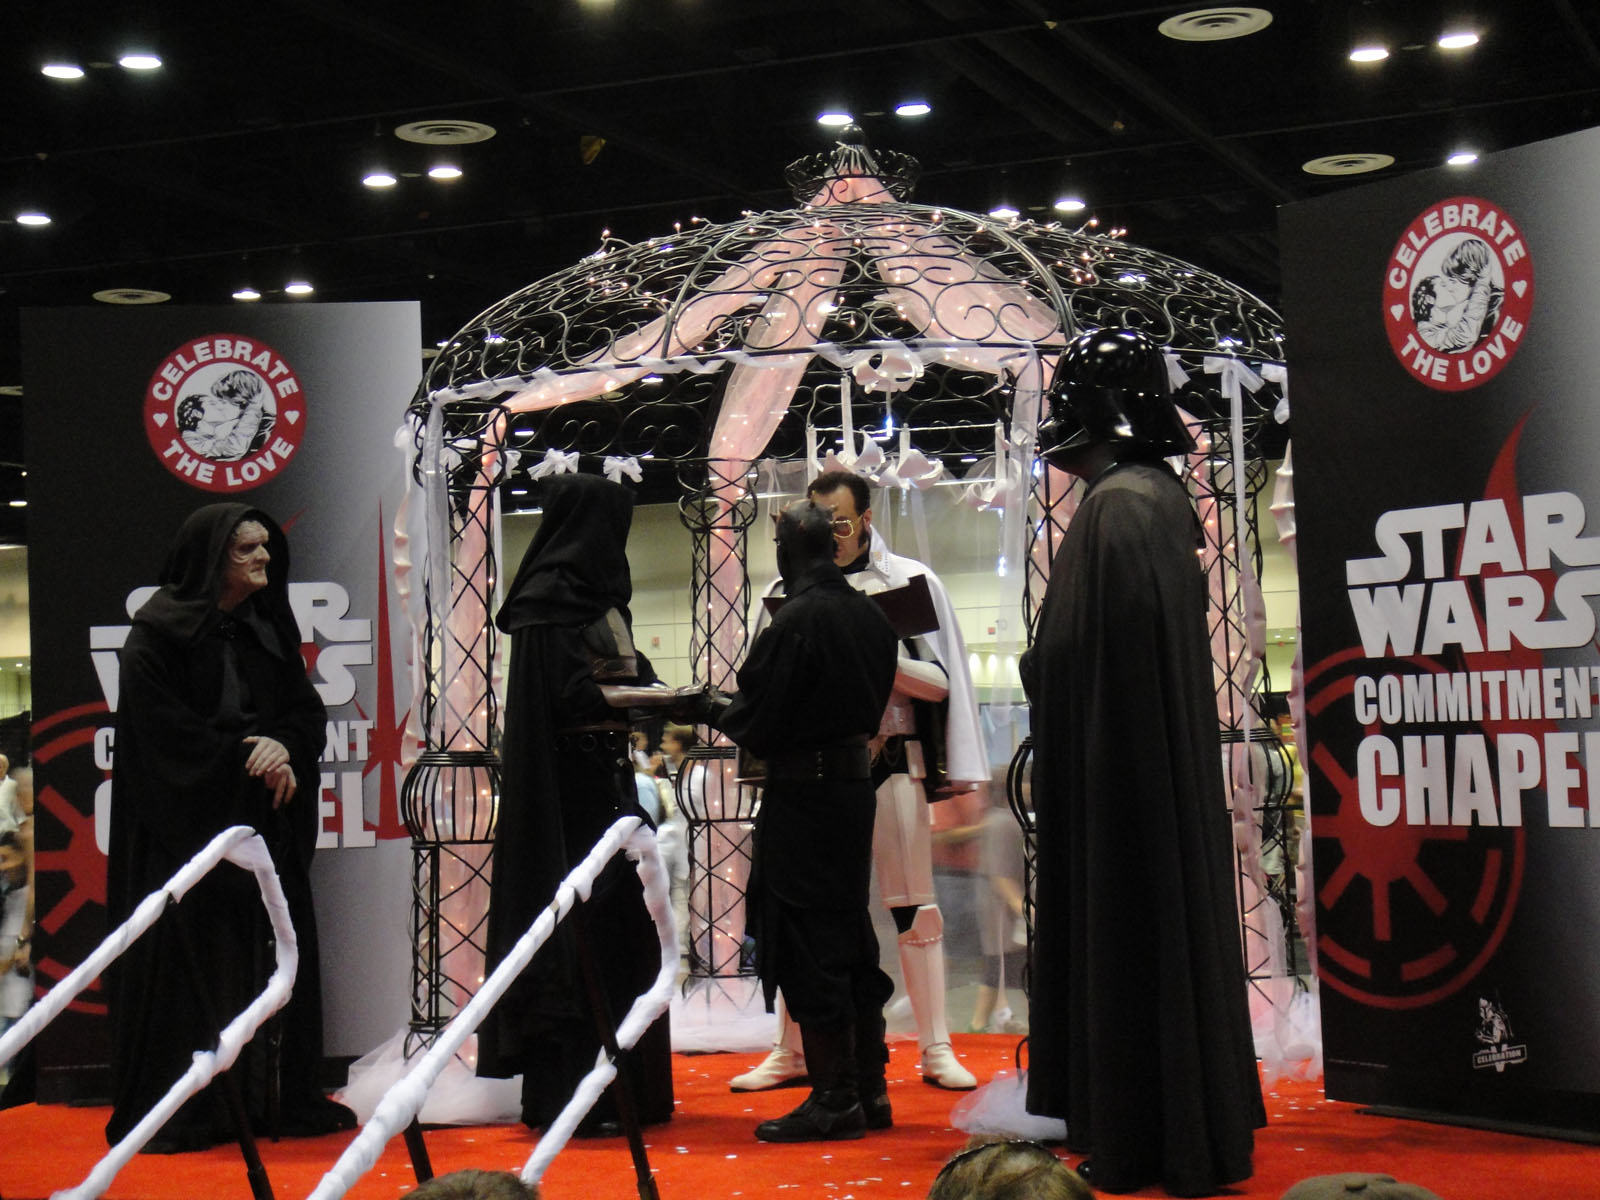 File:Star Wars Celebration V - Sith ceremony at the Commitment Chapel  (4940421391).jpg - Wikipedia